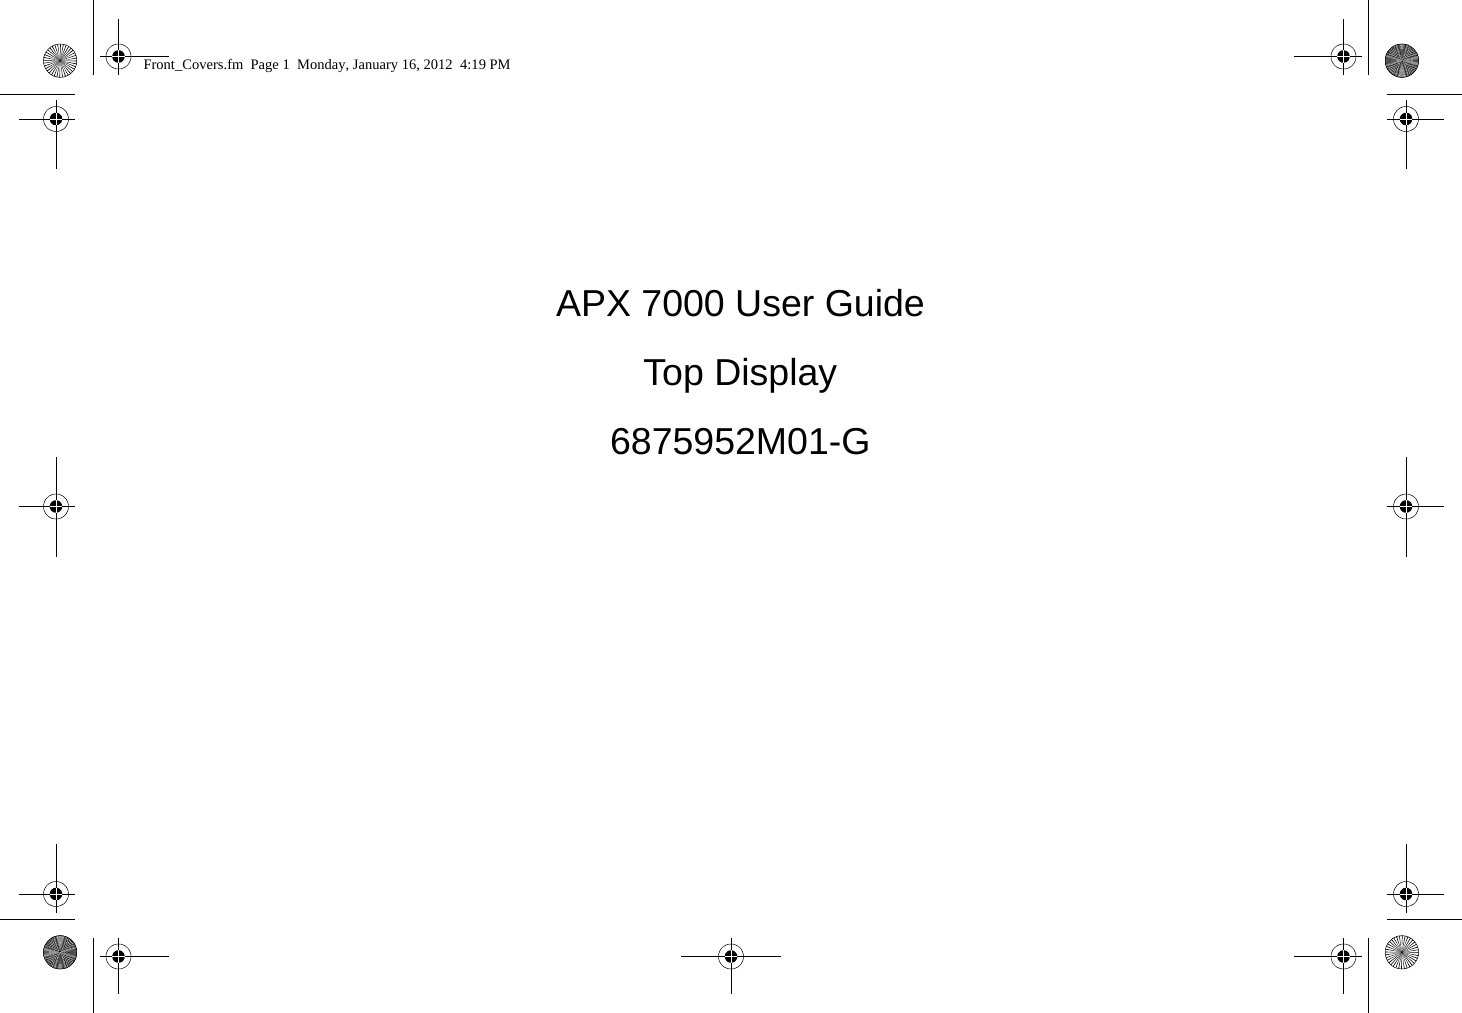 APX 7000 User GuideTop Display6875952M01-GFront_Covers.fm  Page 1  Monday, January 16, 2012  4:19 PM